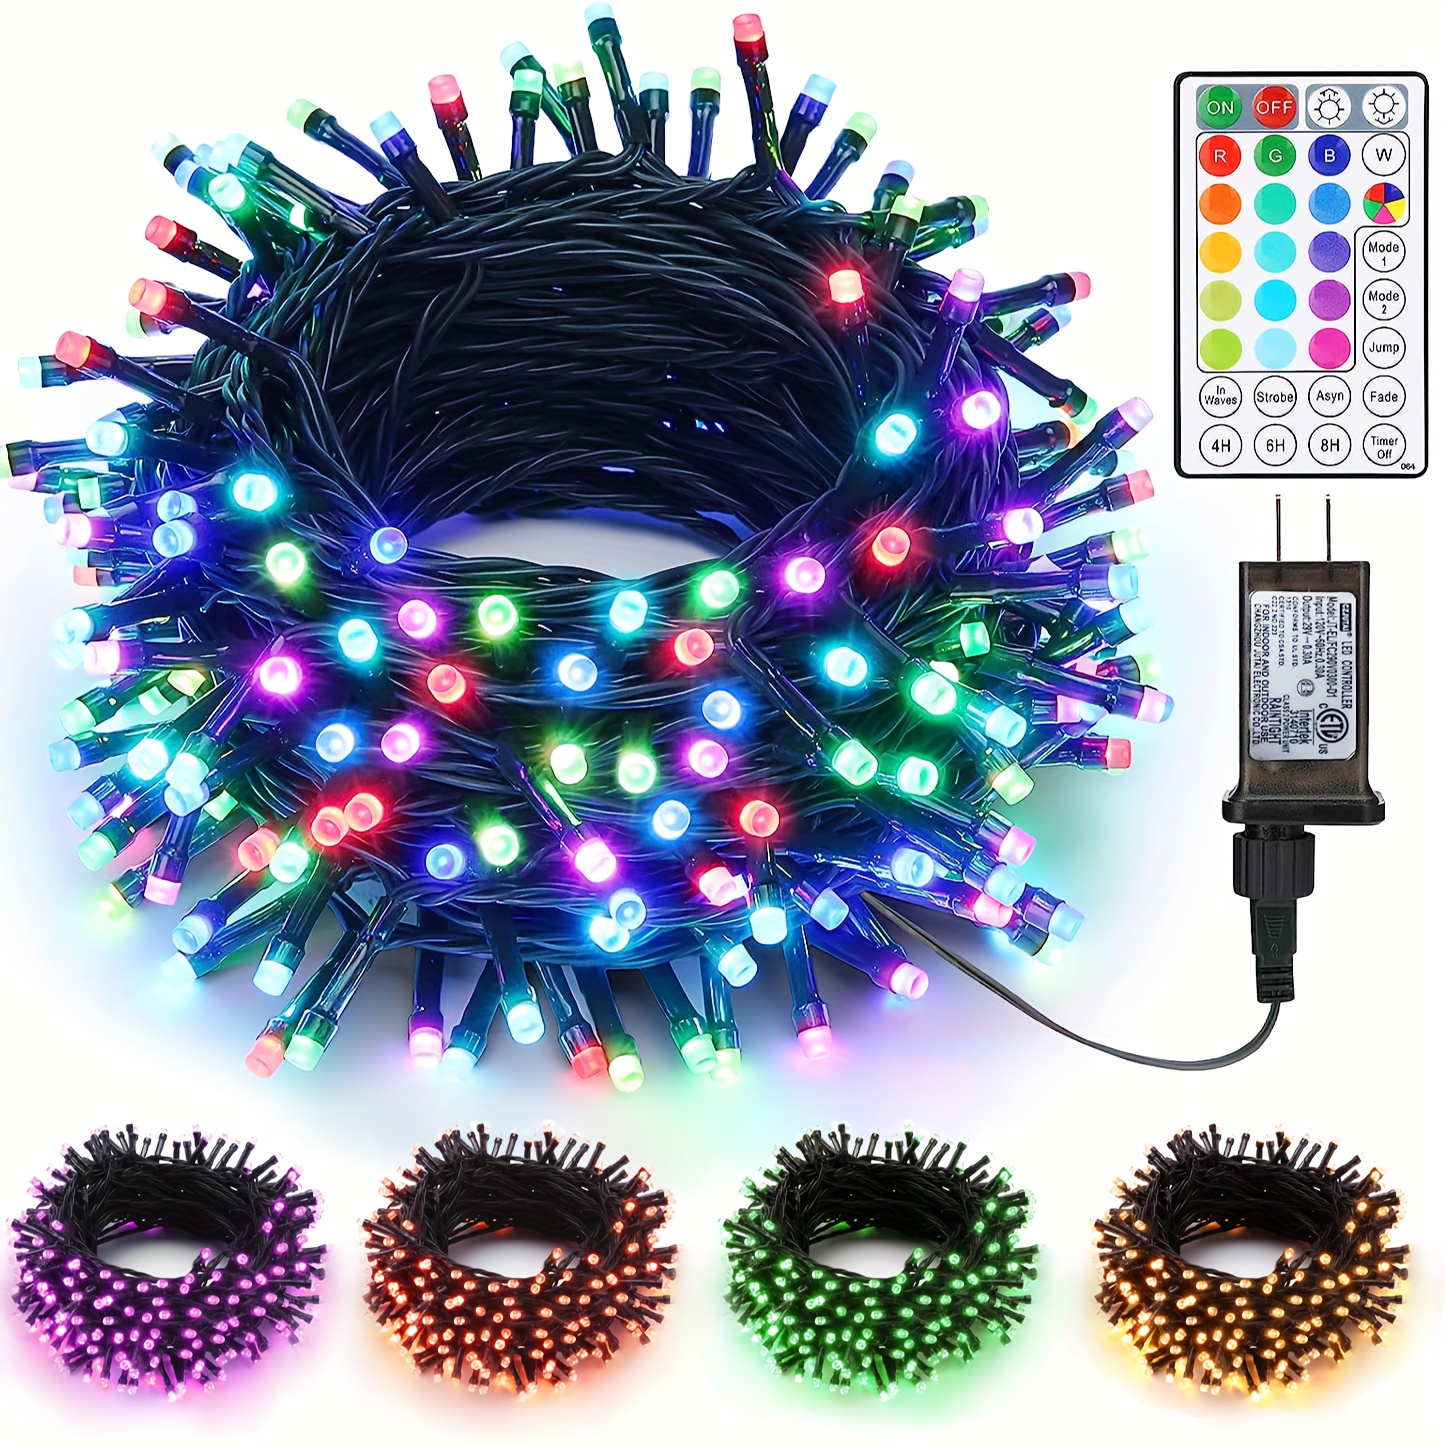 1 Pack 100/200LED RGB Linear Light, RGB Halloween Christmas String Lights  Tree Lights With Remote Timer Plug, Color Changing Christmas Tree Lights, In